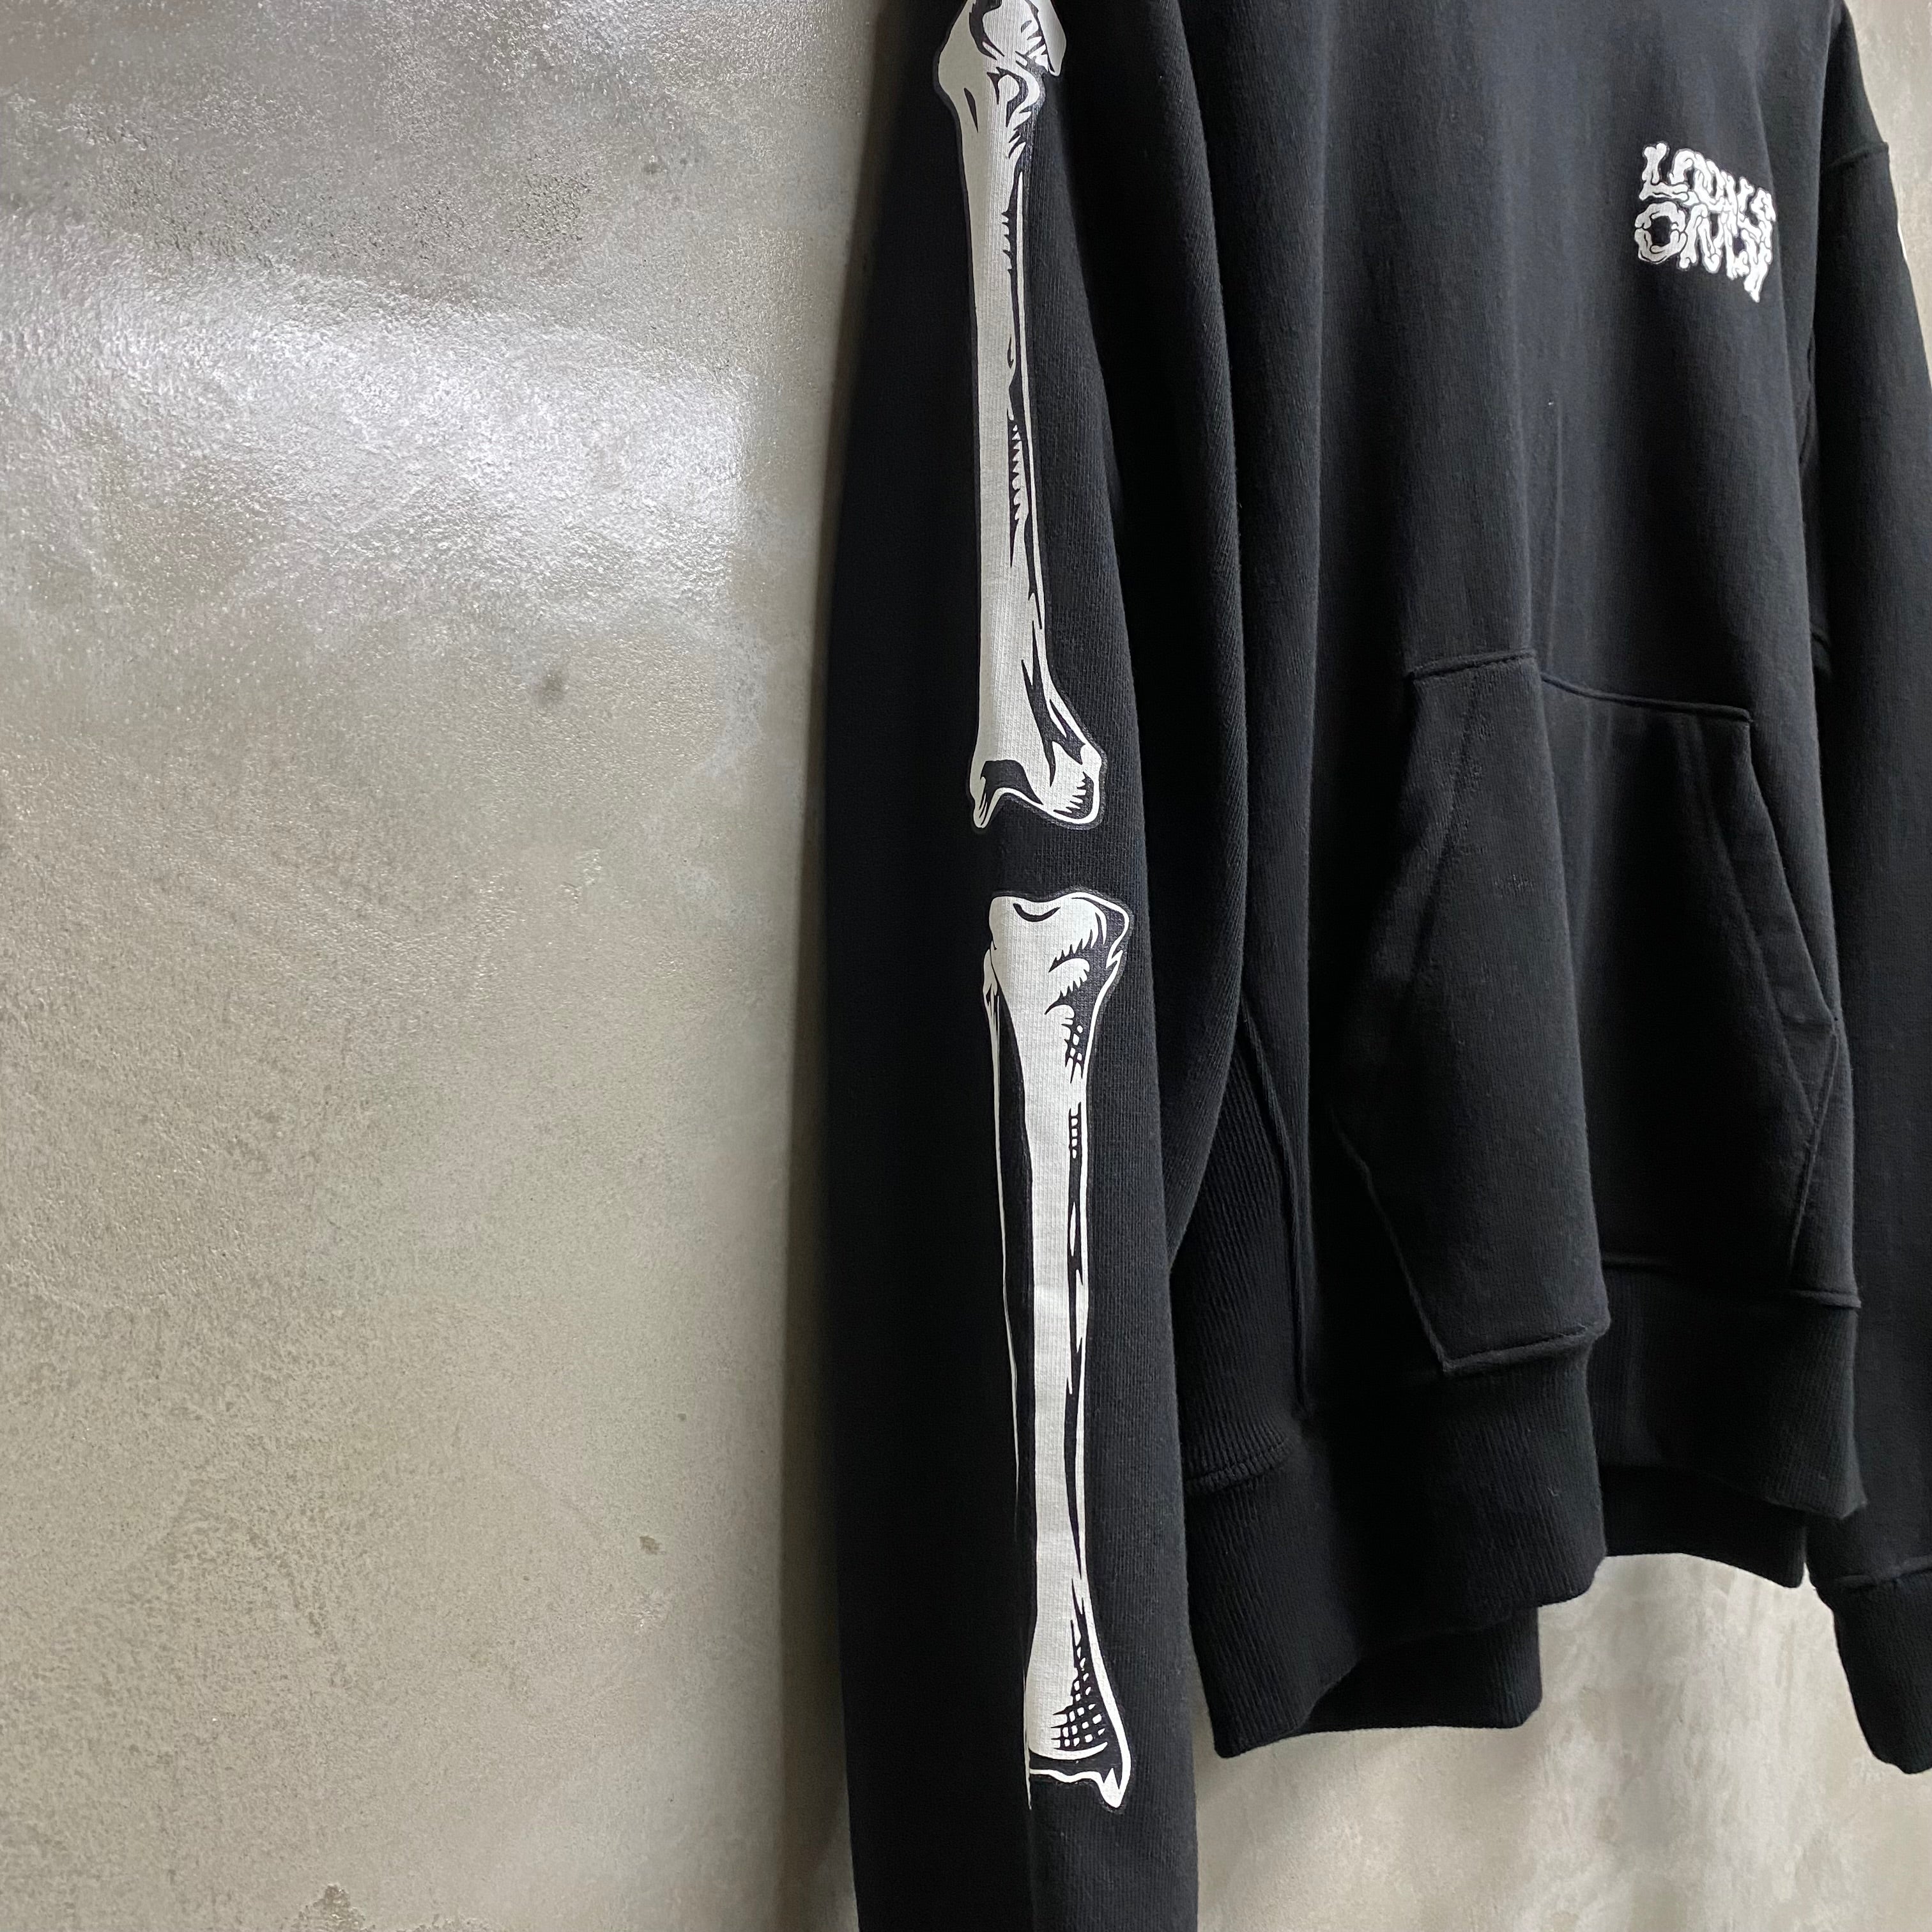 LOCALS ONLY  BONES PULL OVER HOODIE  / LOCALS ONLY